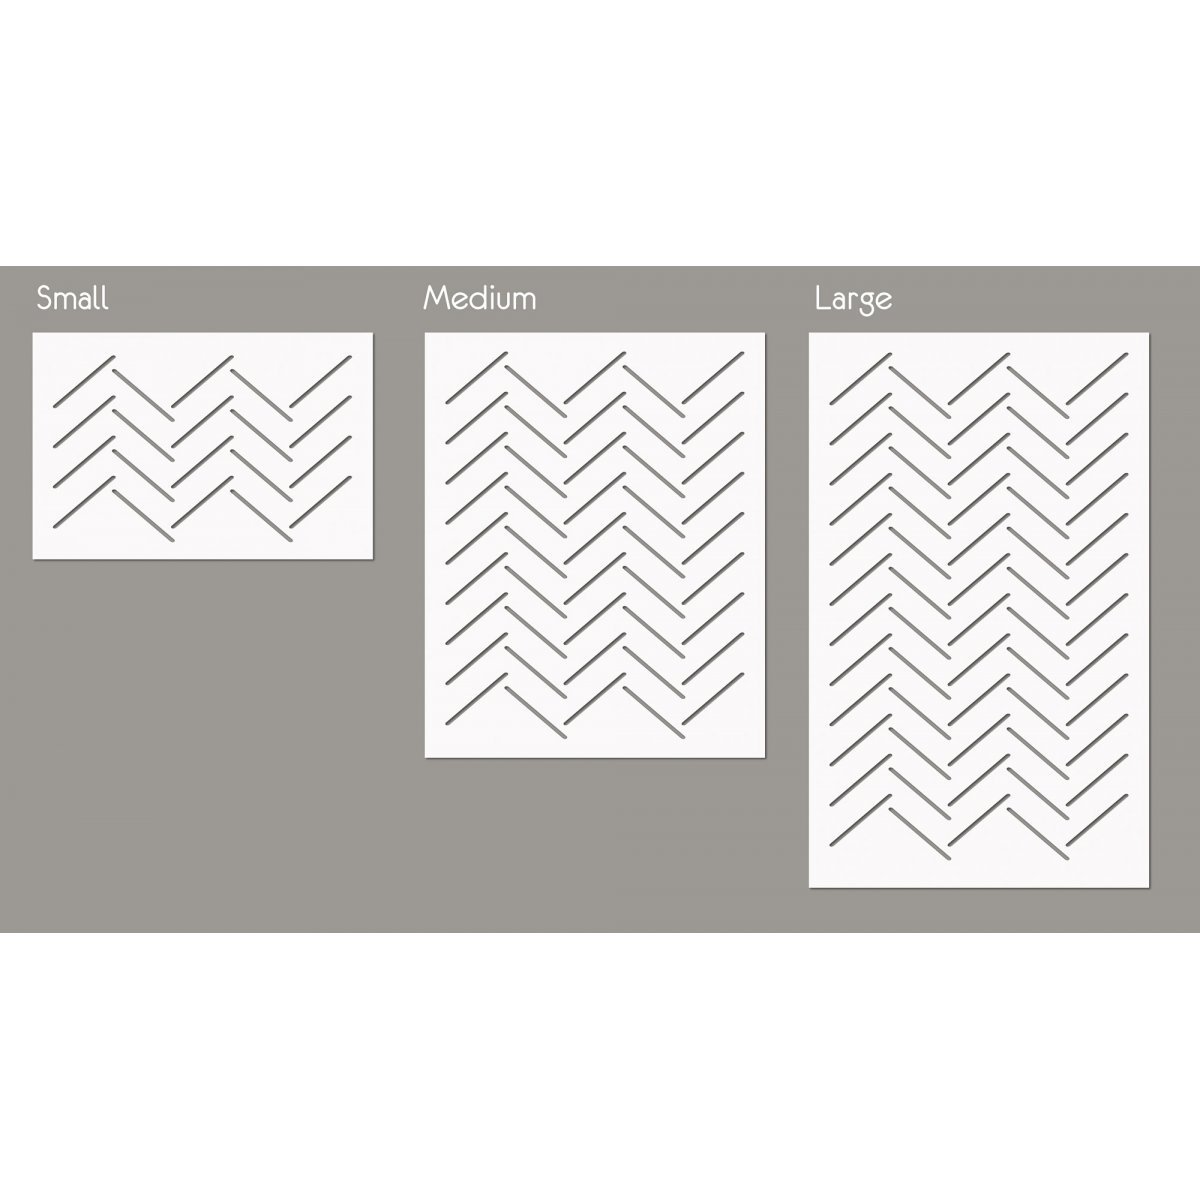 HERRINGBONE ILLUSION / Reusable Allover Large Wall Stencils for Painting